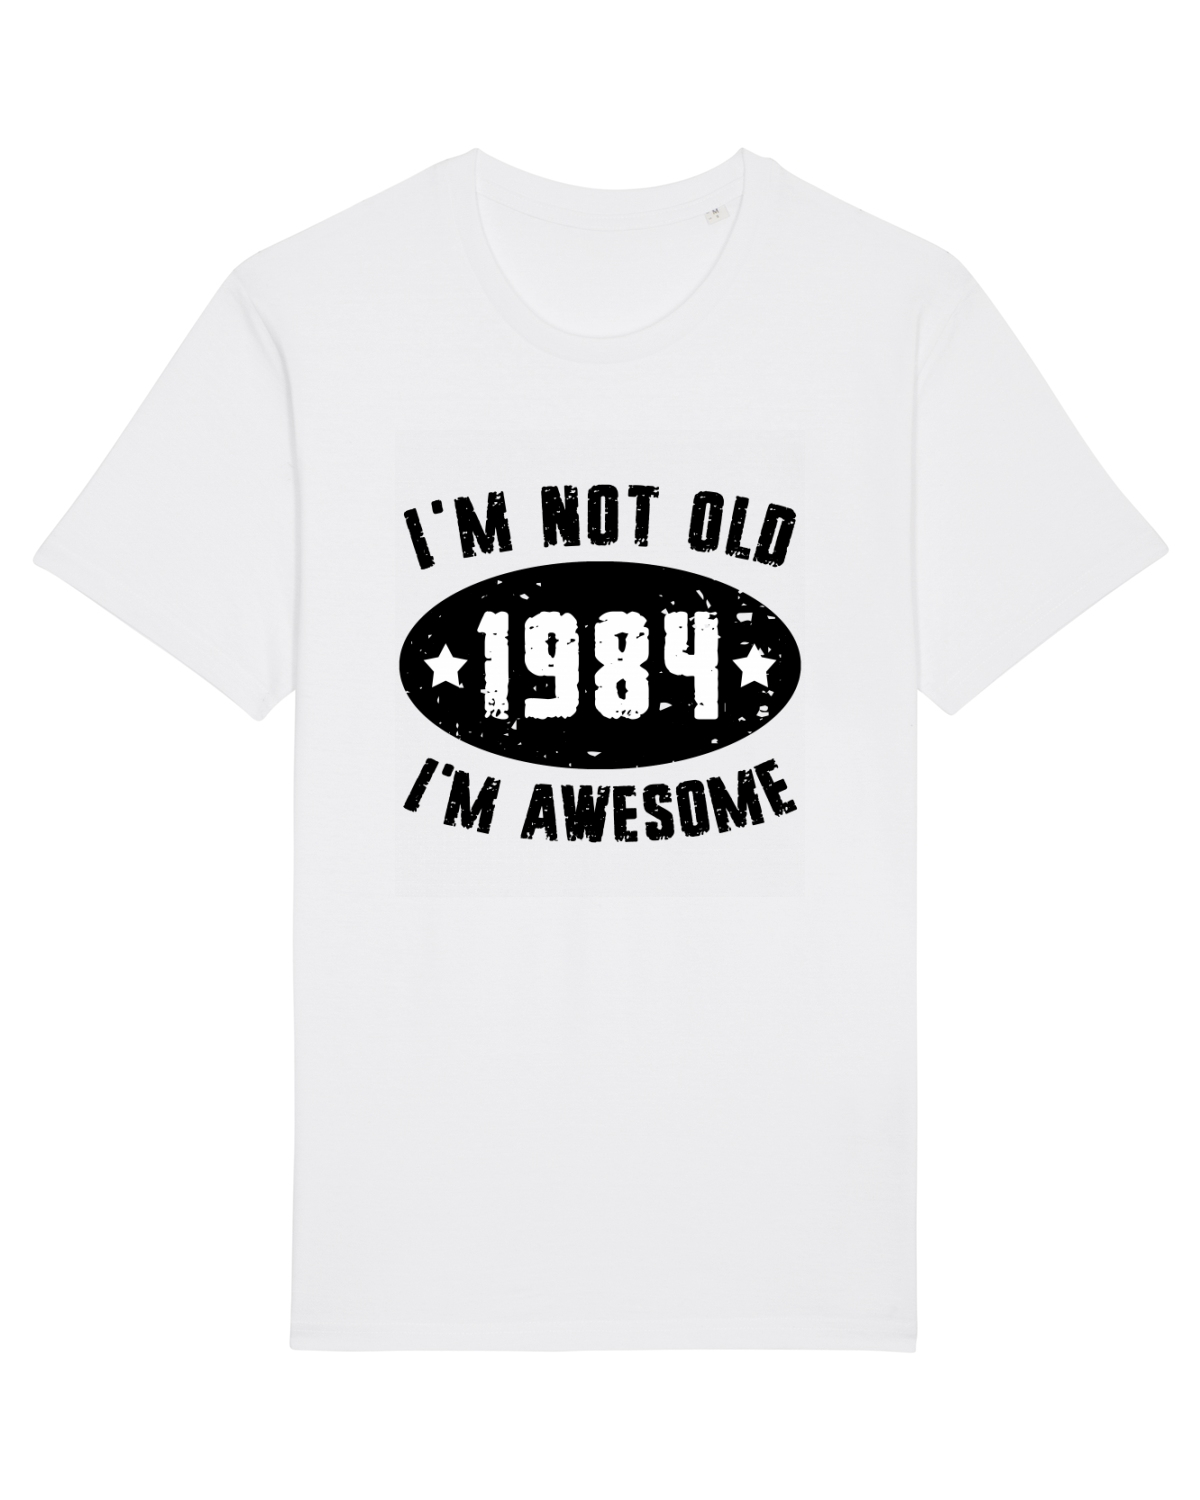 Adaptive a cup of Mexico Tricouri personalizate I'm Not Old I'm Awesome 1984 2 - NaNaNa